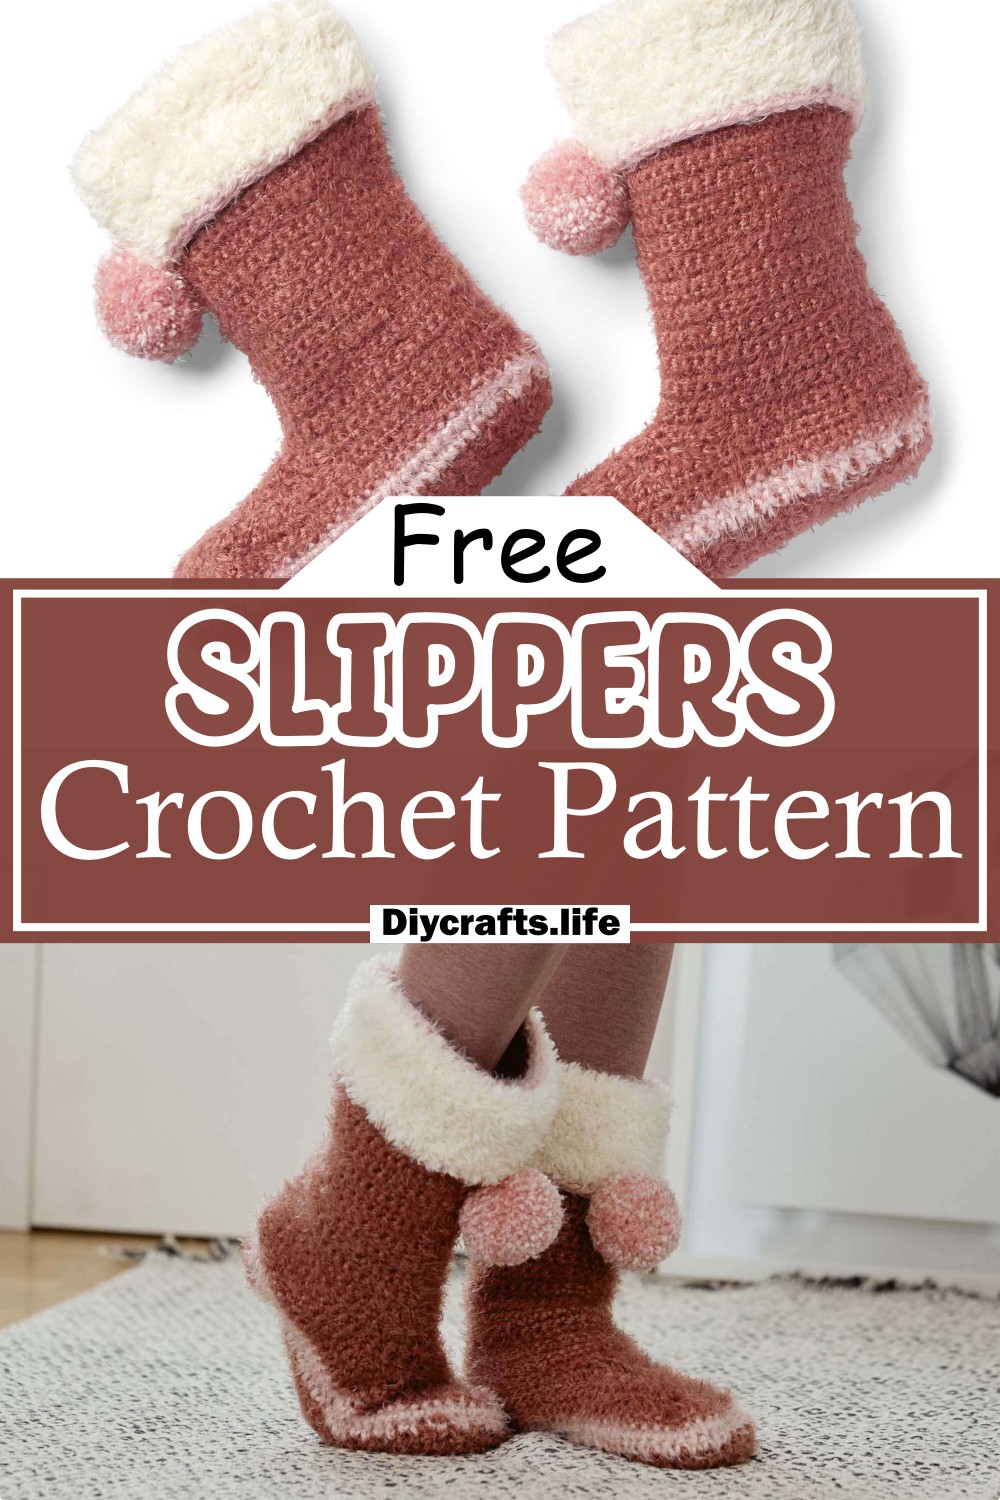 Turn The Page Crochet Slippers Pattern